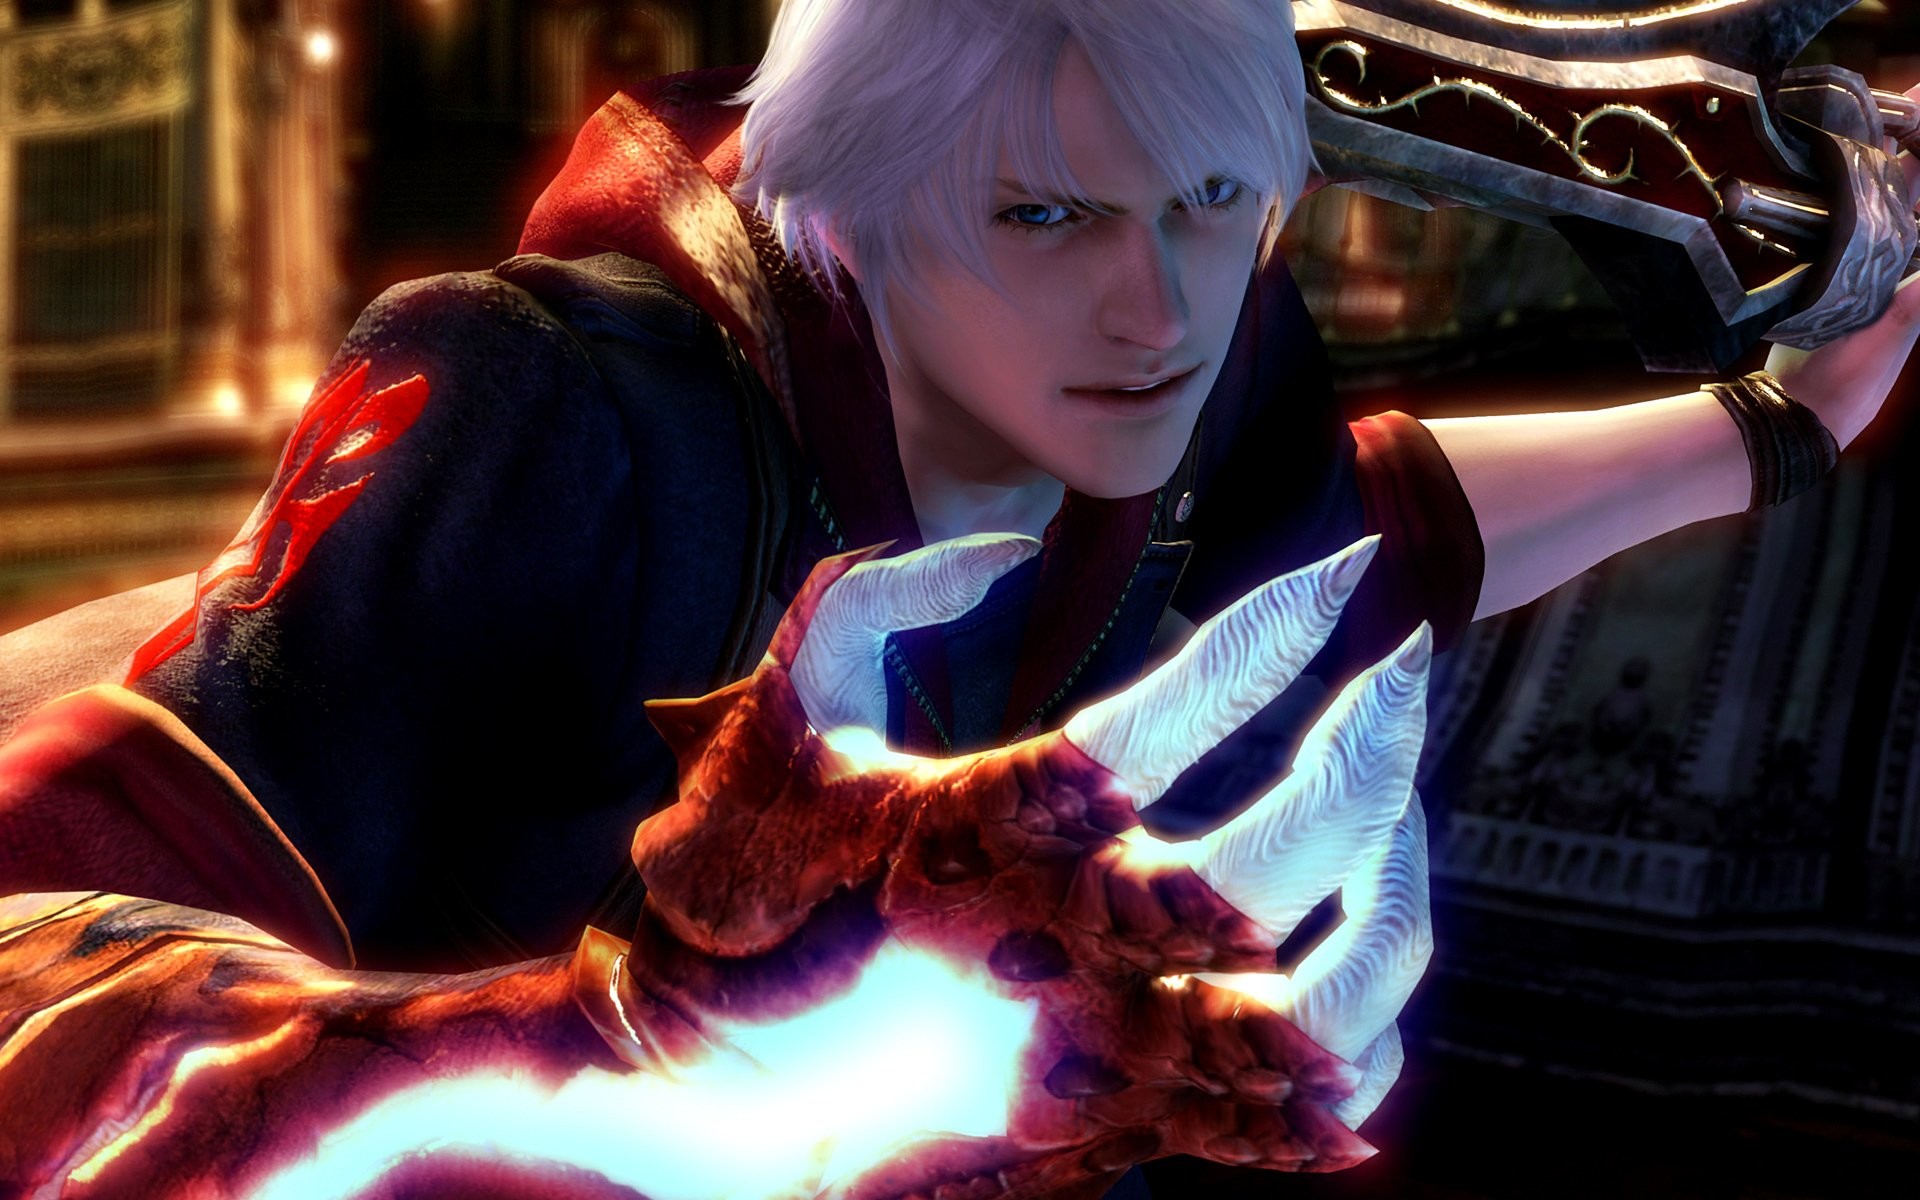 1920x1200 HD Wallpaper | Background Image ID:12.  Video Game Devil May Cry 4.  AlphaSystem. 66 56,140 7 1